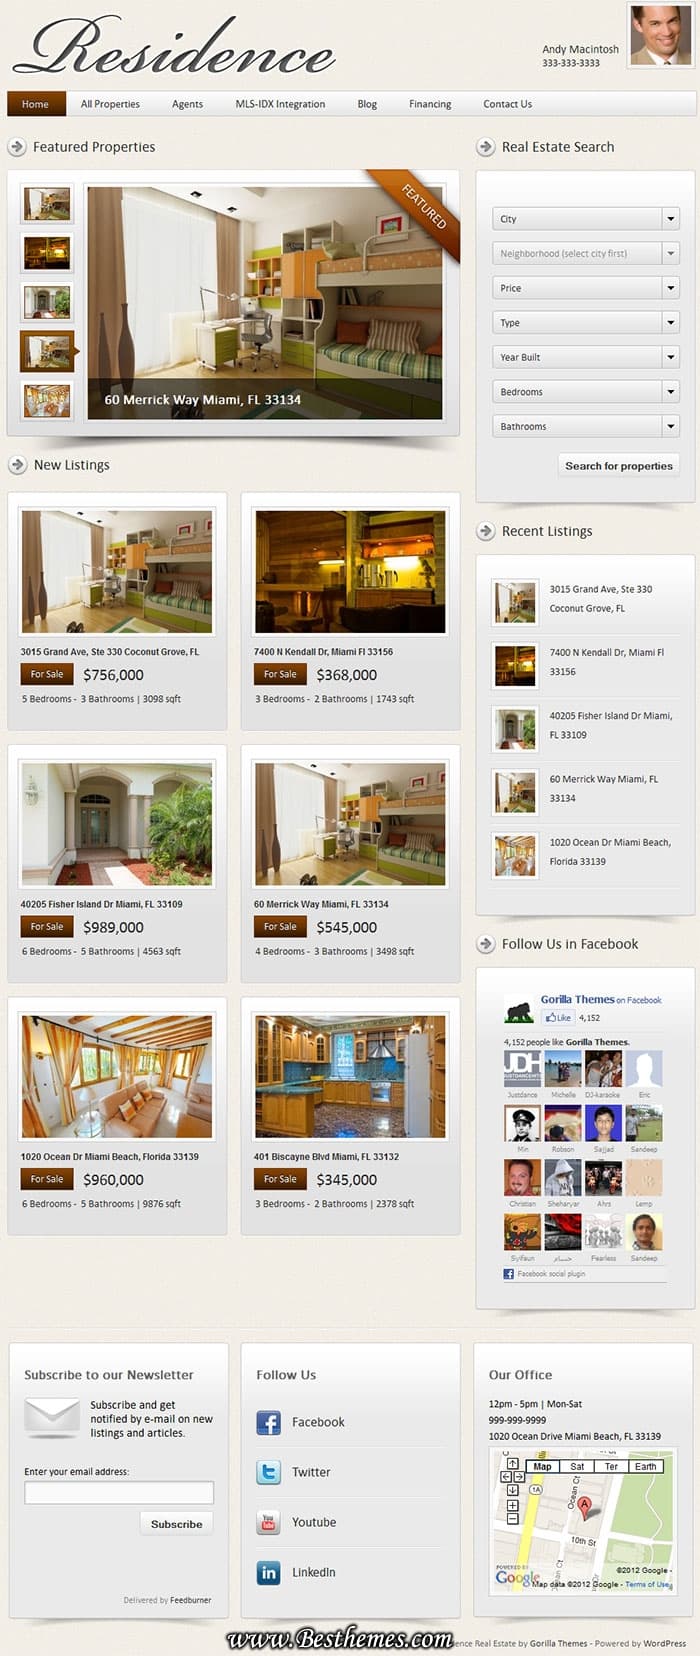 Download Residence WordPress Theme From Gorilla Themes, Multiple property search modules, 2 column layout